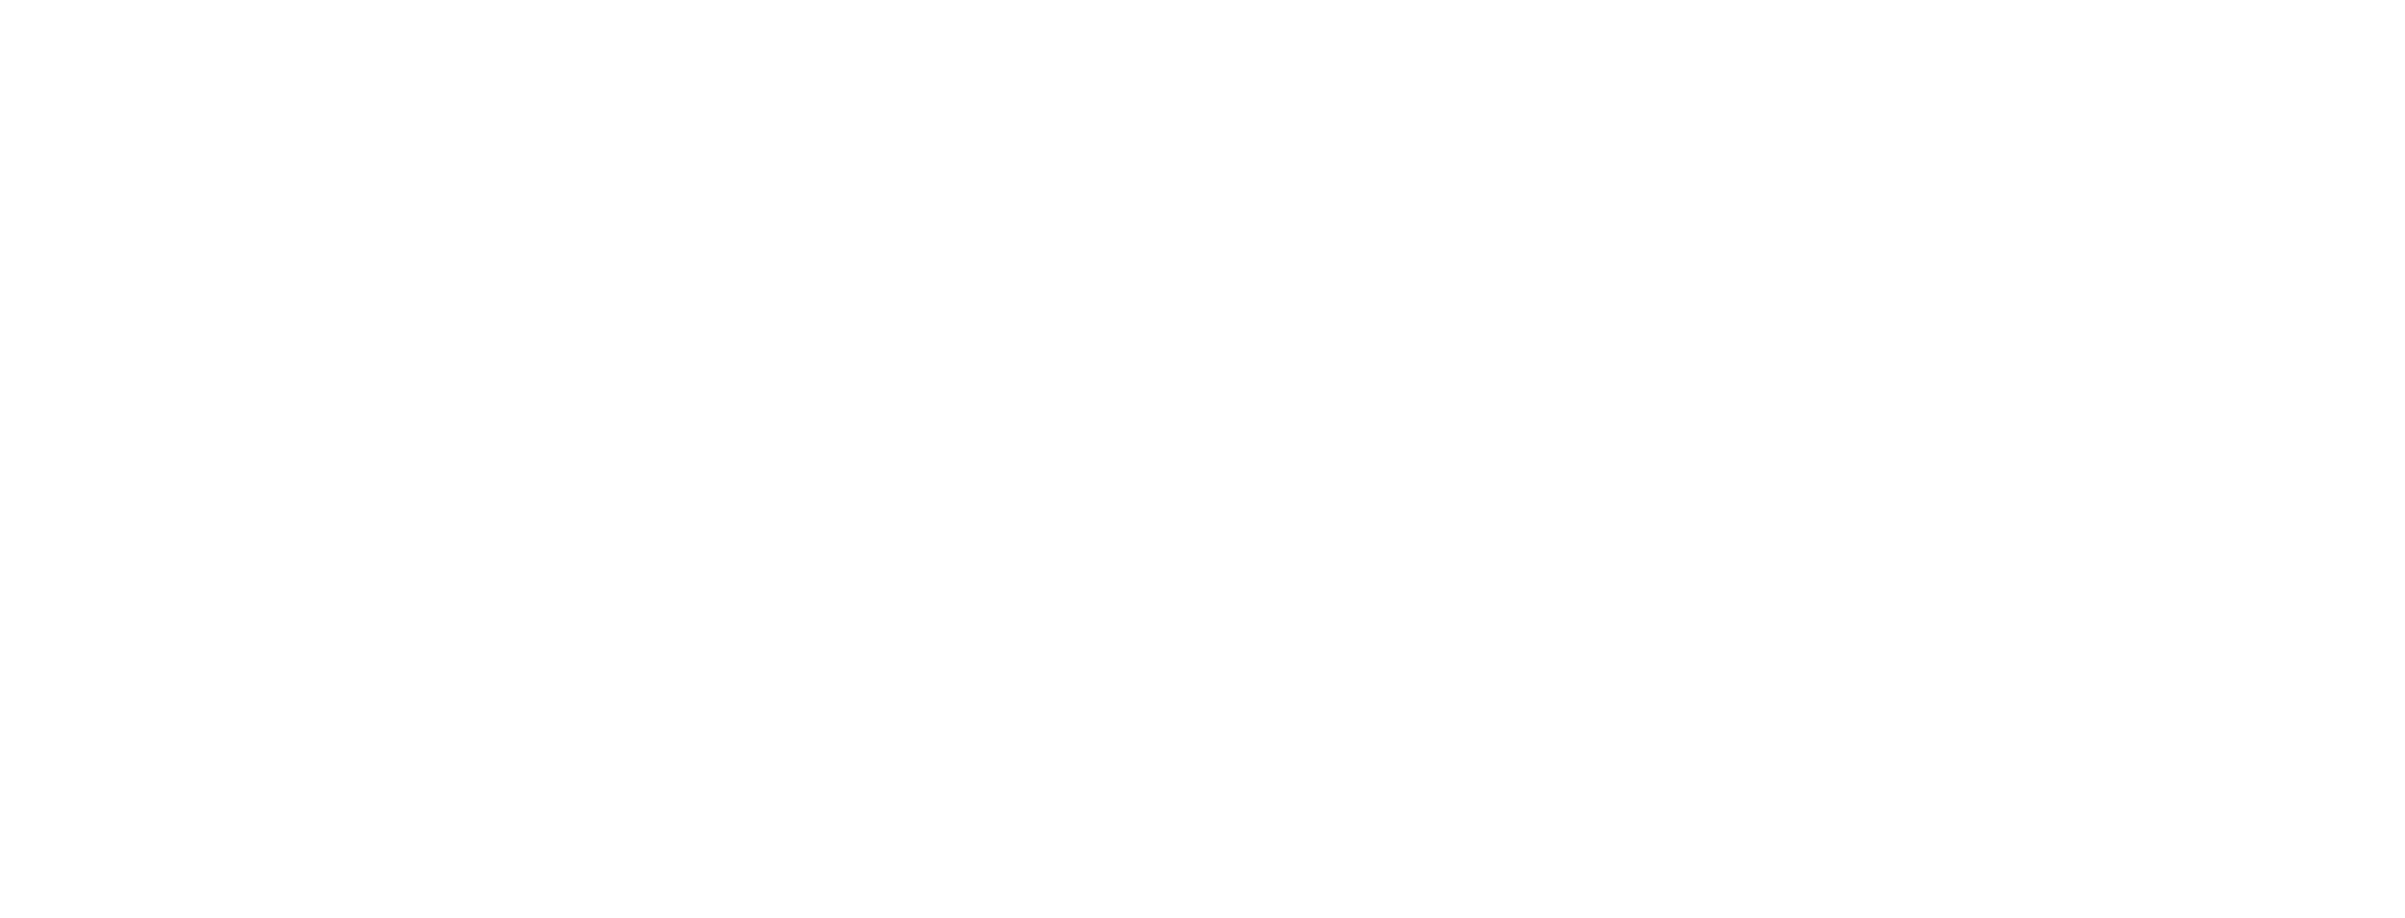 BANG! creative - strategy by design